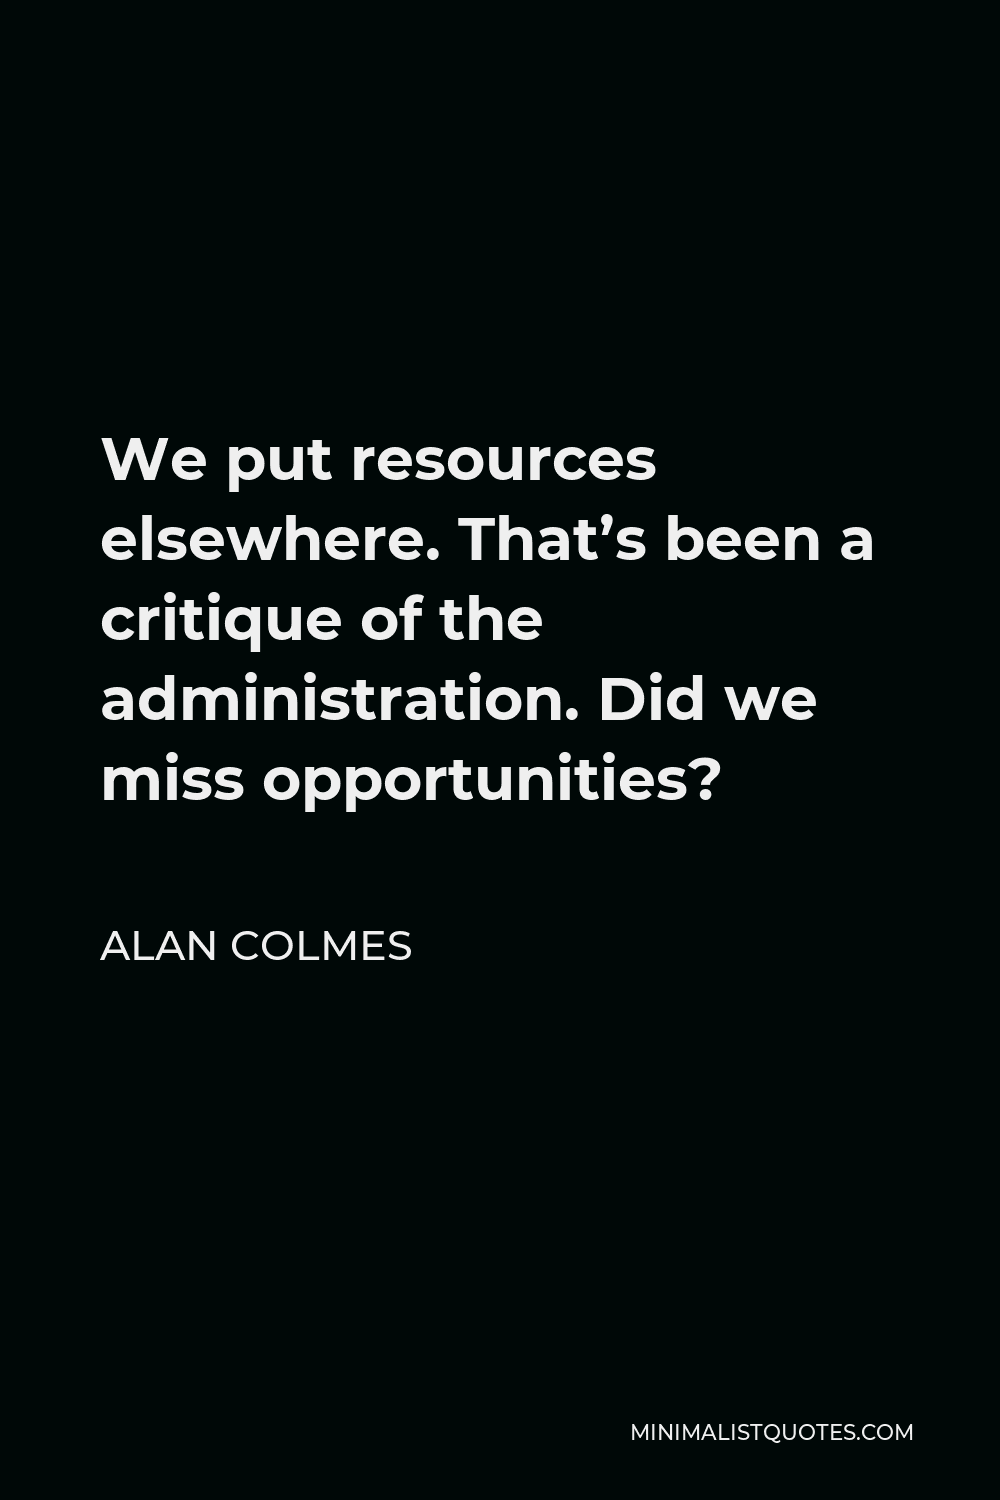 Alan Colmes Quote - We put resources elsewhere. That’s been a critique of the administration. Did we miss opportunities?